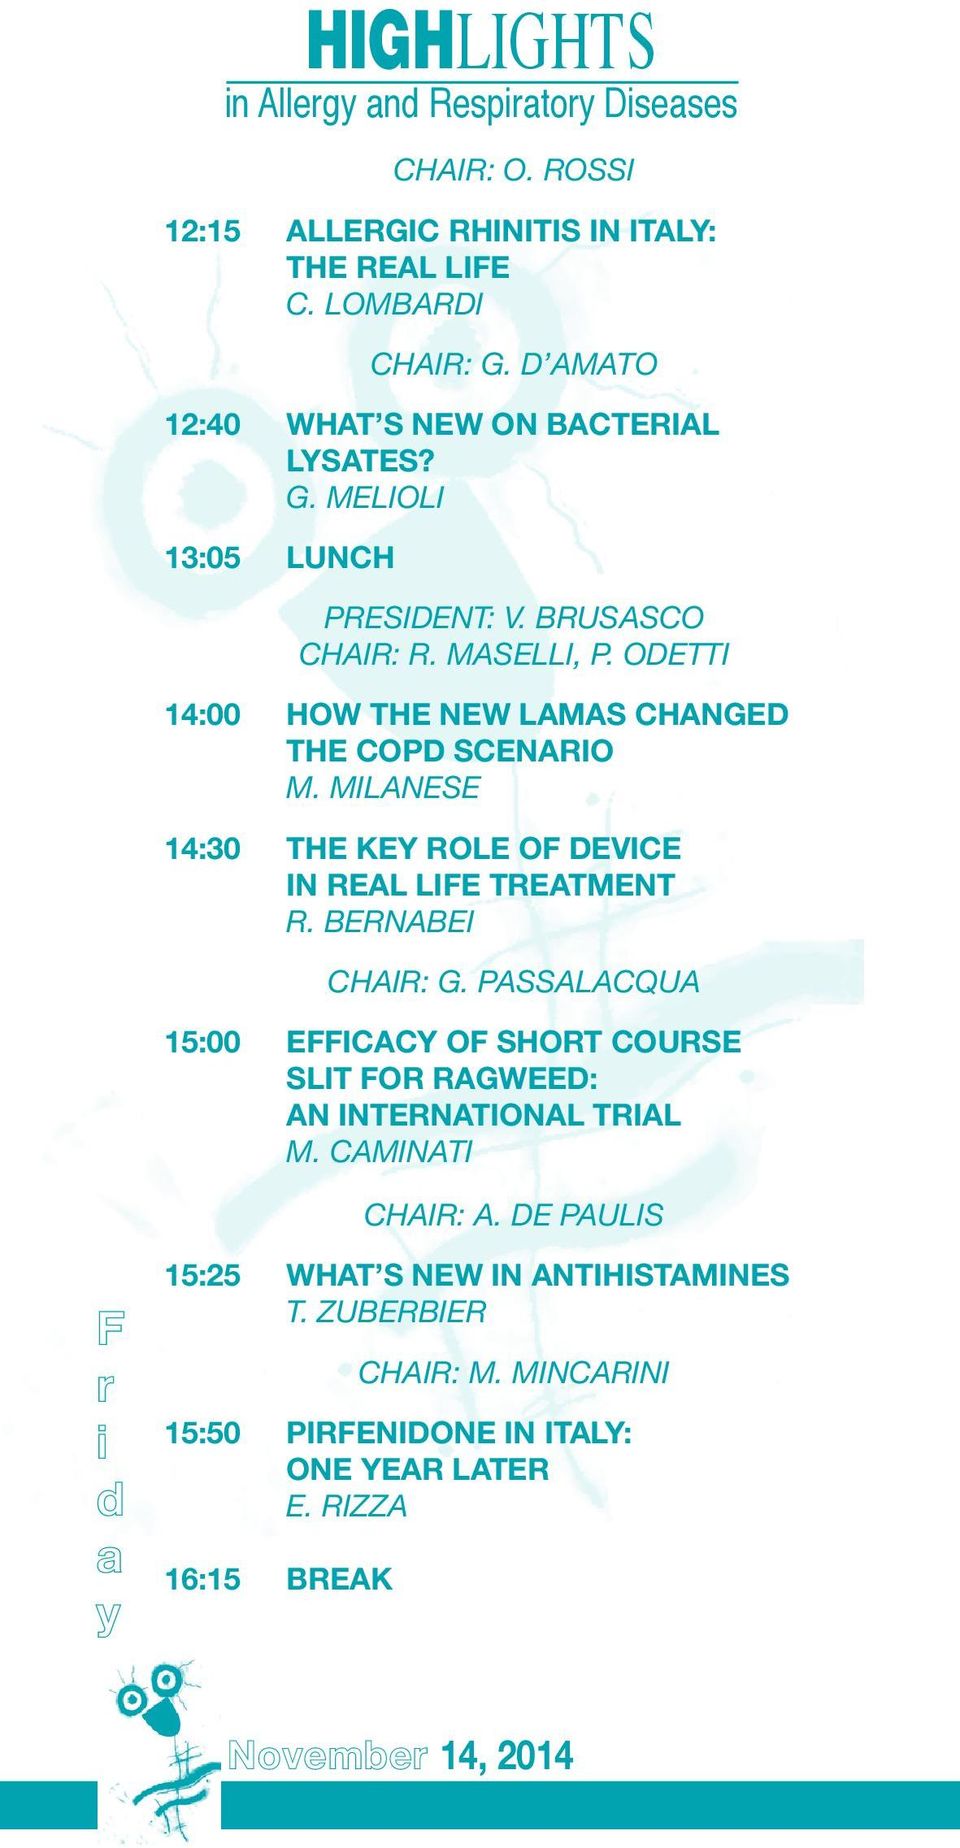 MILANESE 14:30 THE KEY ROLE OF DEVICE IN REAL LIFE TREATMENT R. BERNABEI CHAIR: G.